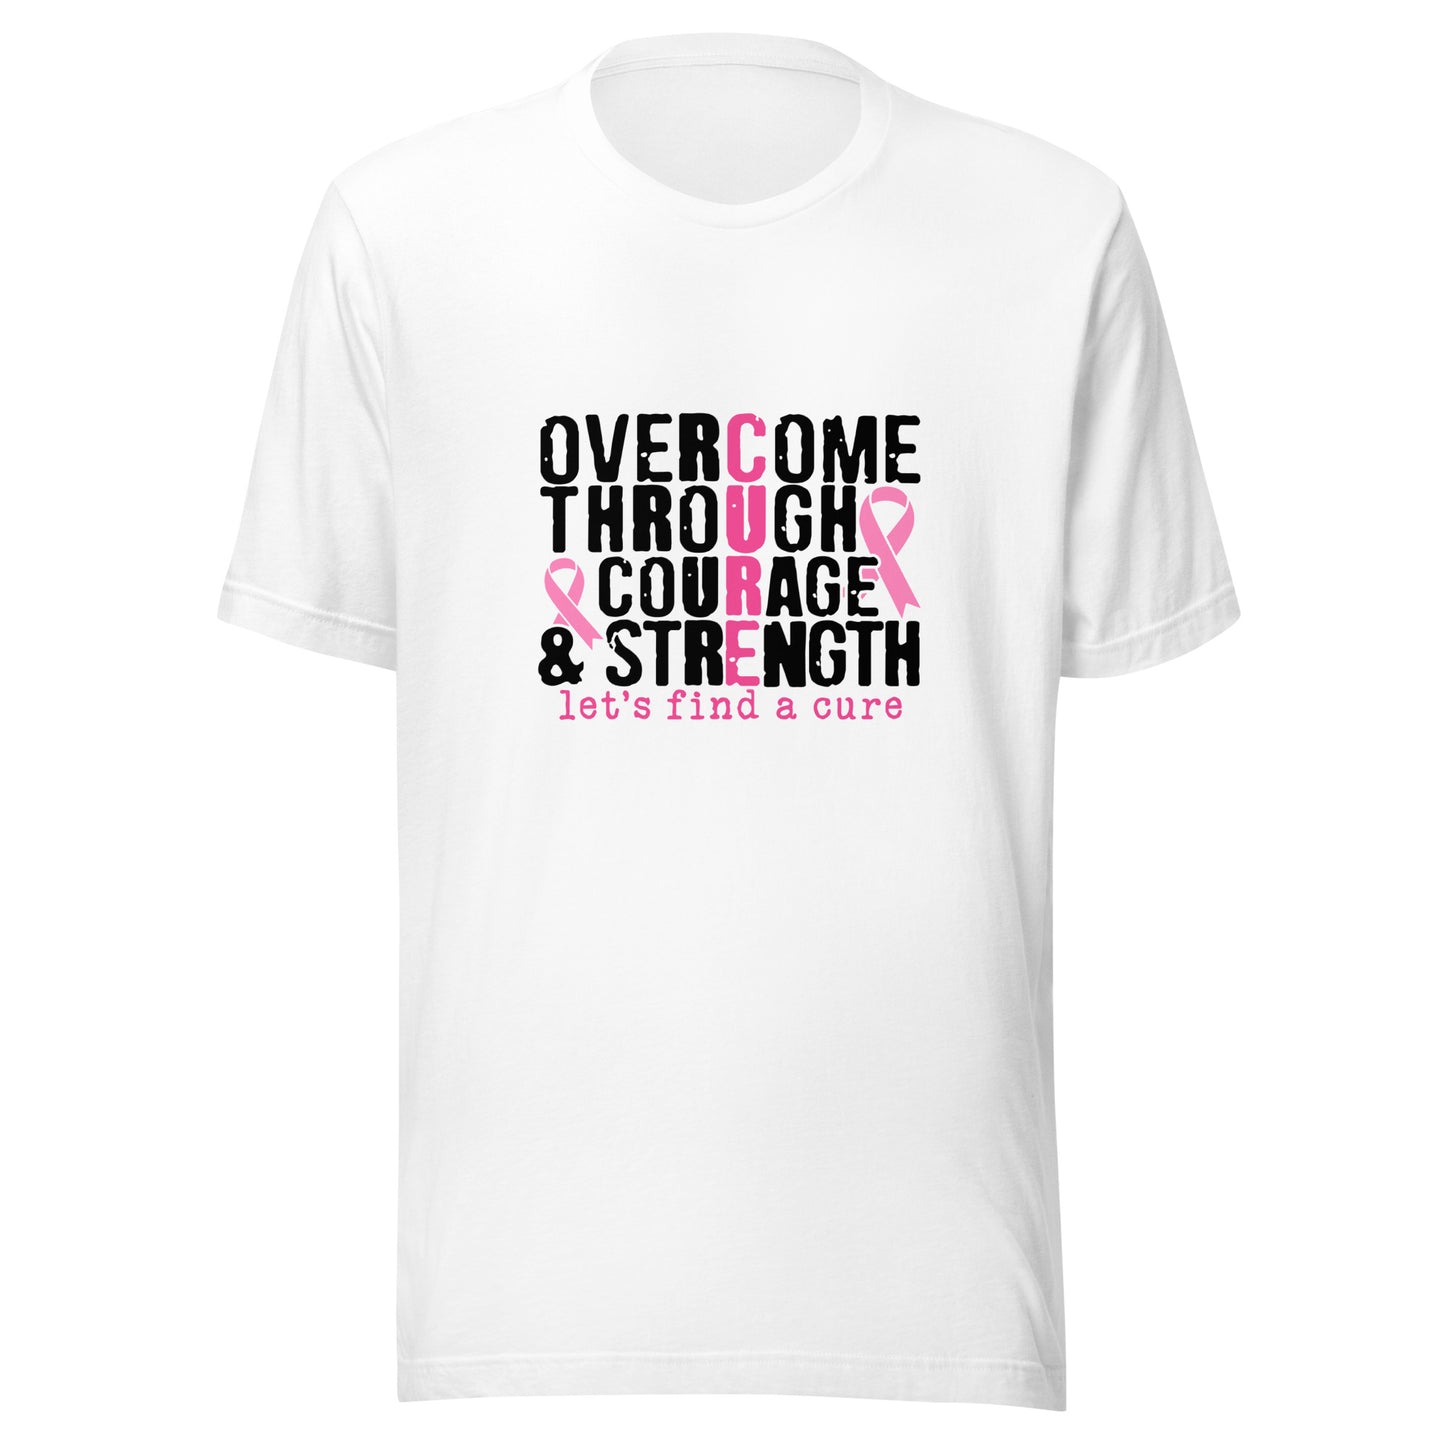 Overcome Through Courage and Strength - Breast Cancer Support - Survivor - Awareness Pink Ribbon Unisex T-shirt